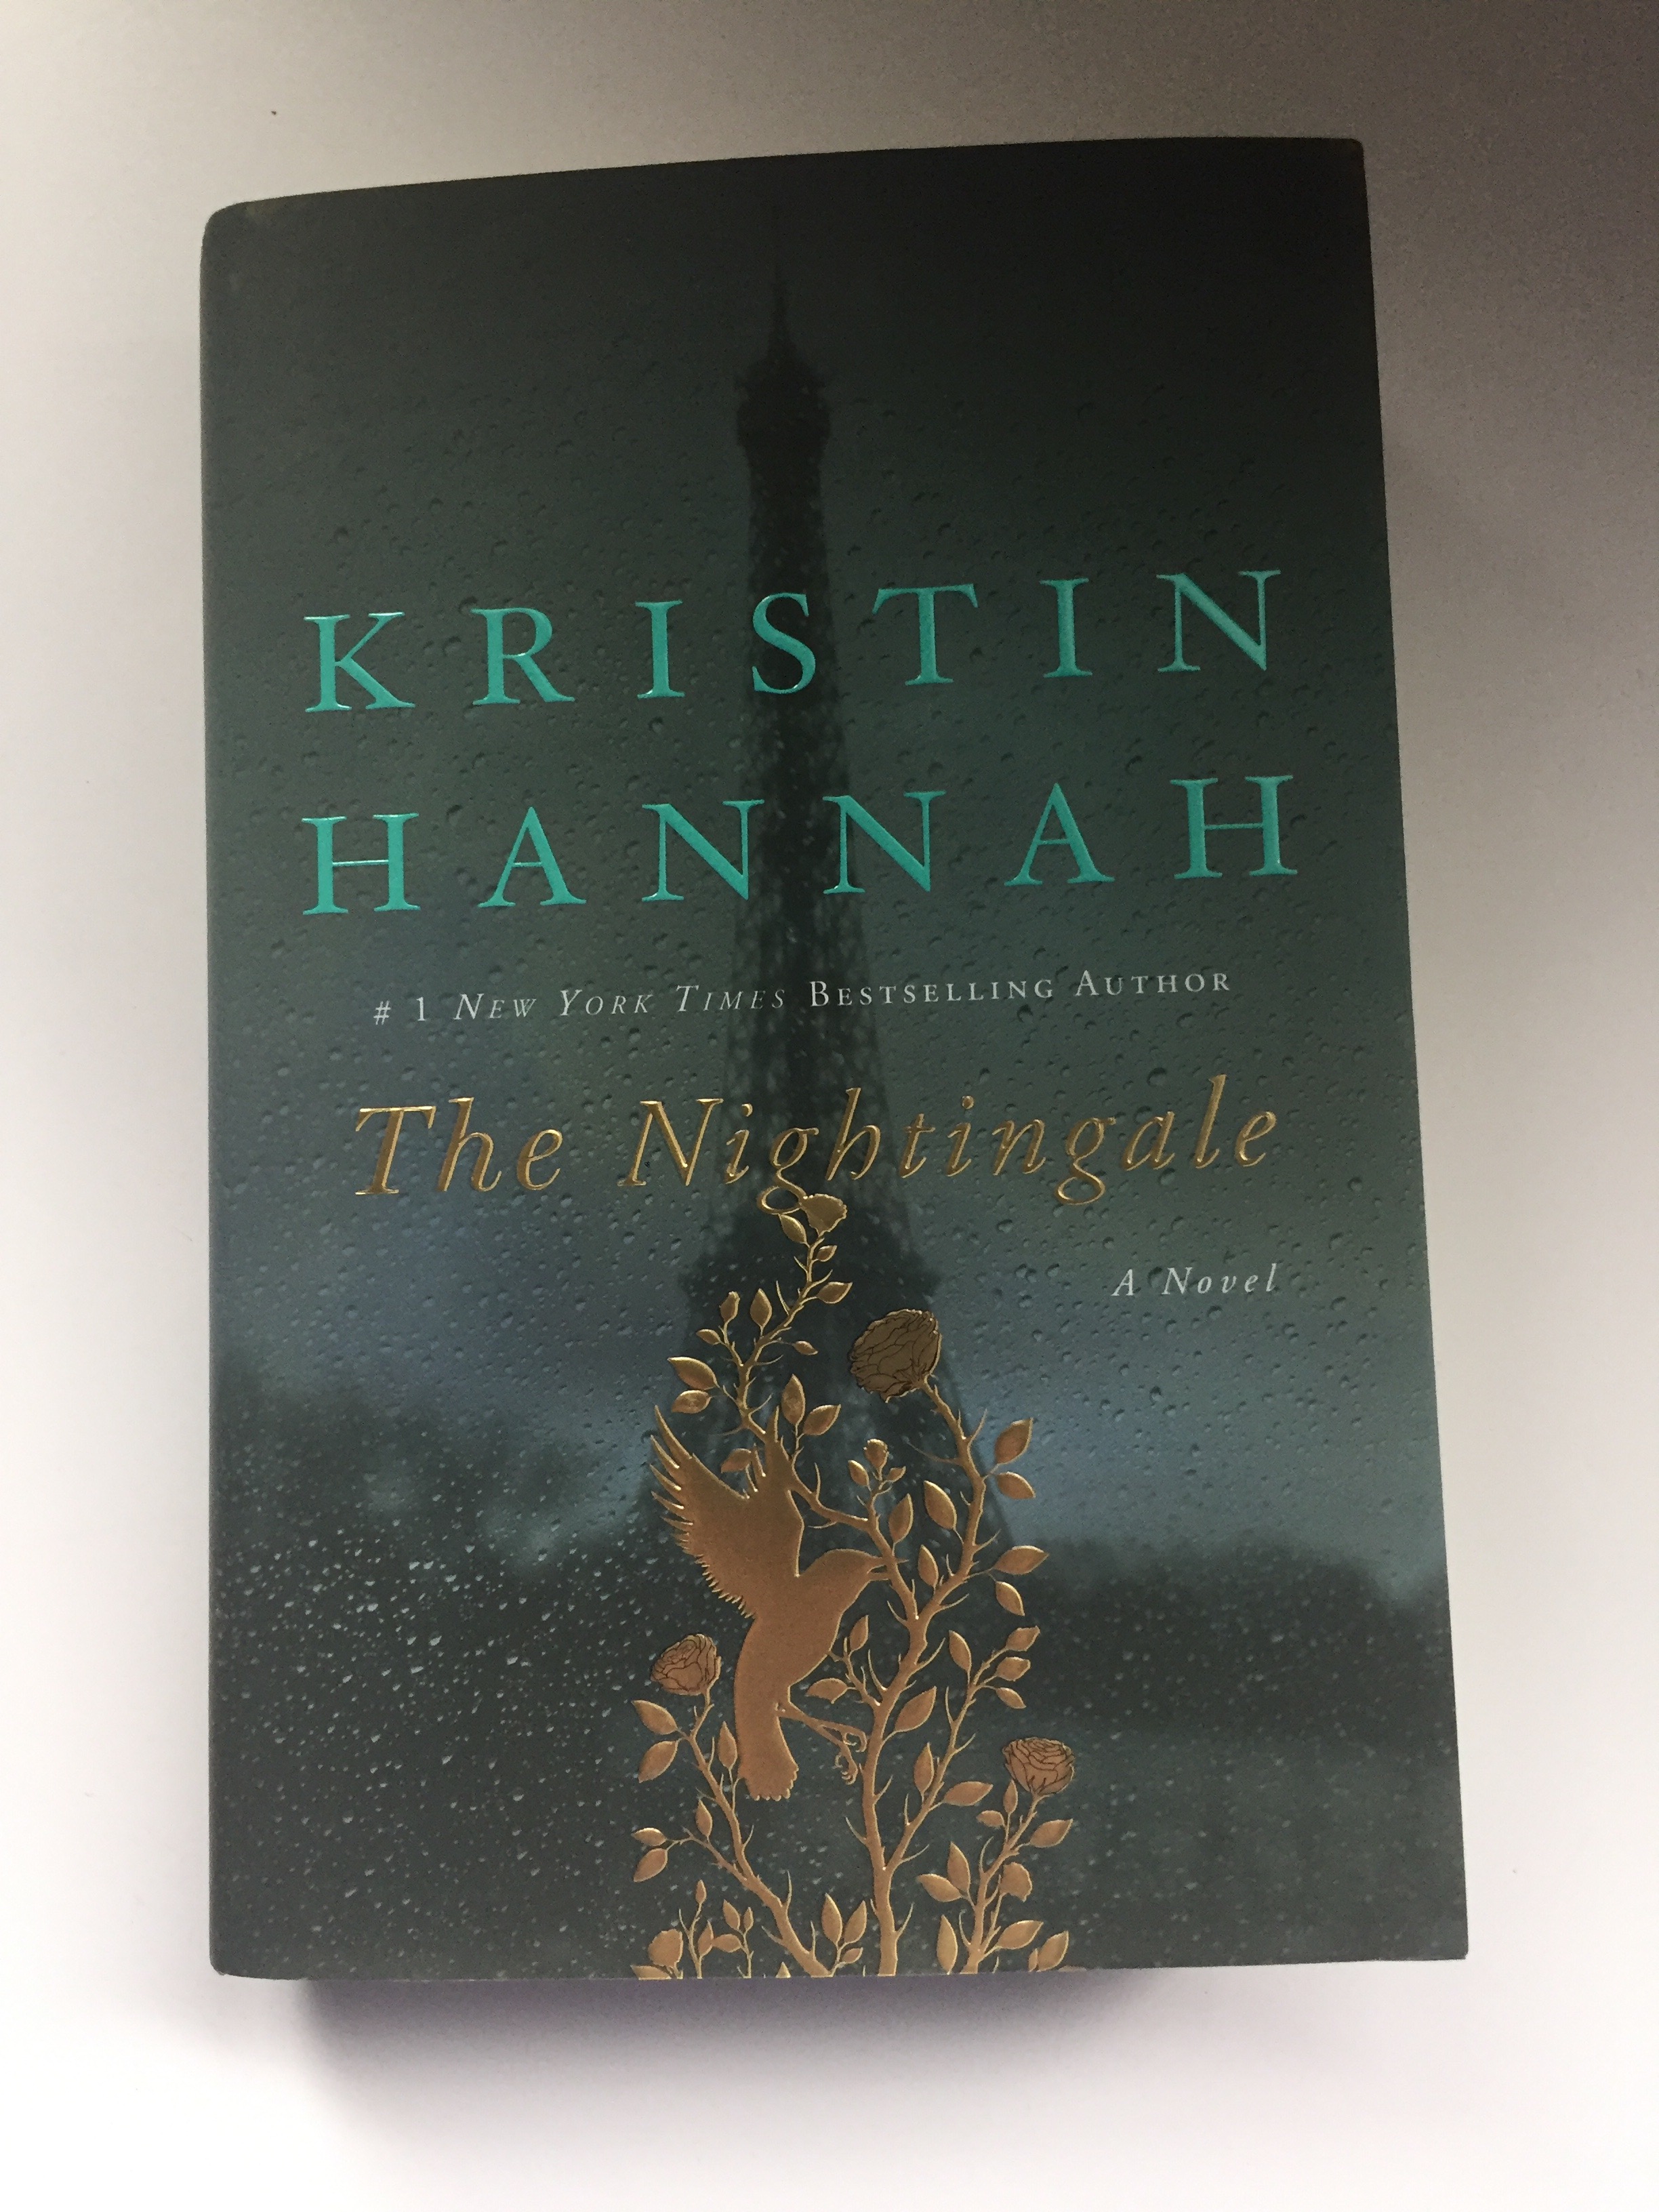 reviews of books by kristin hannah